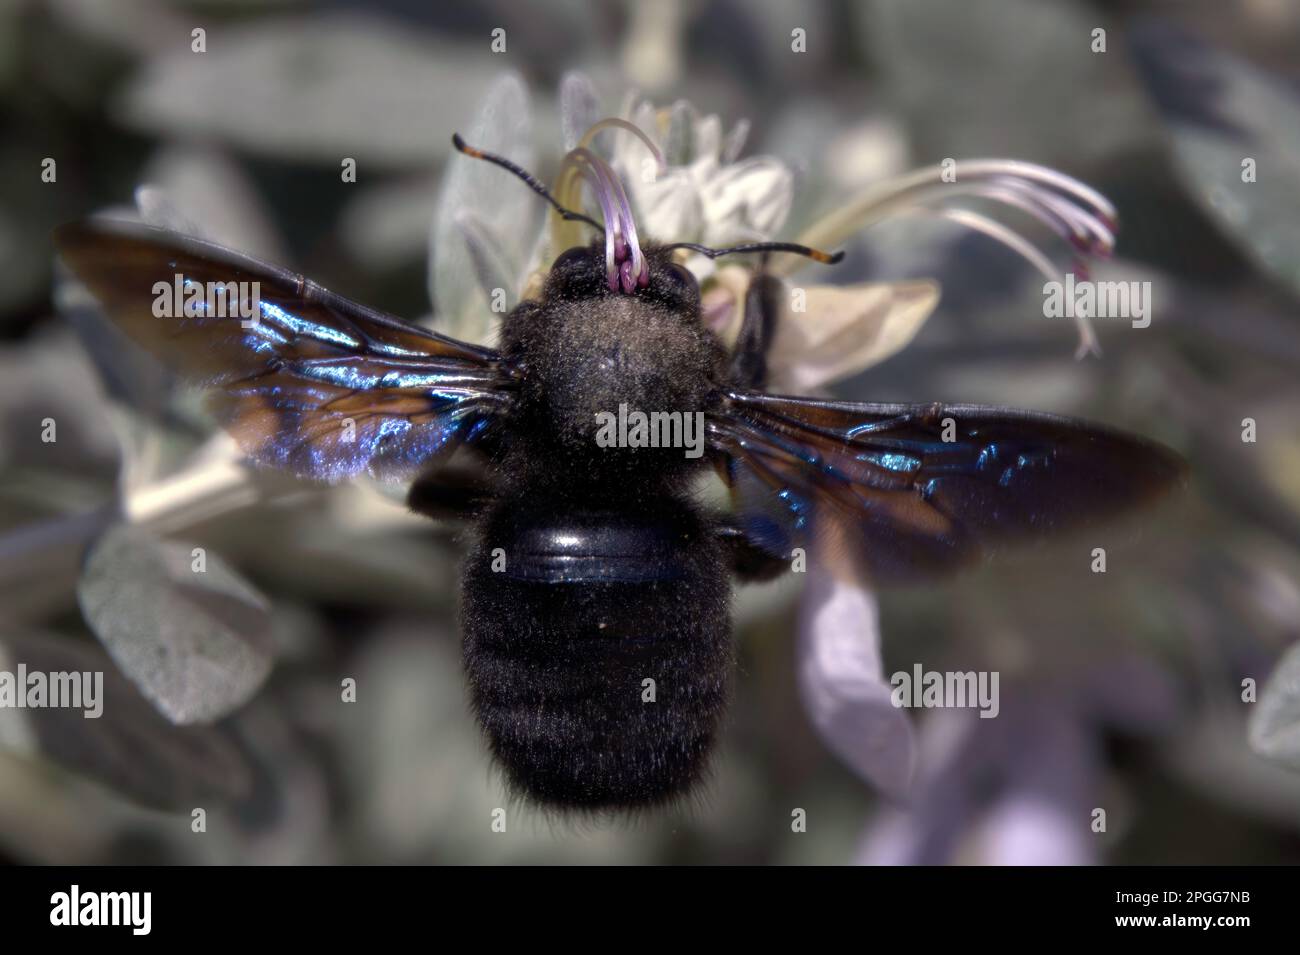 Xylocopa violacea or violet carpenter bee, close up Stock Photo